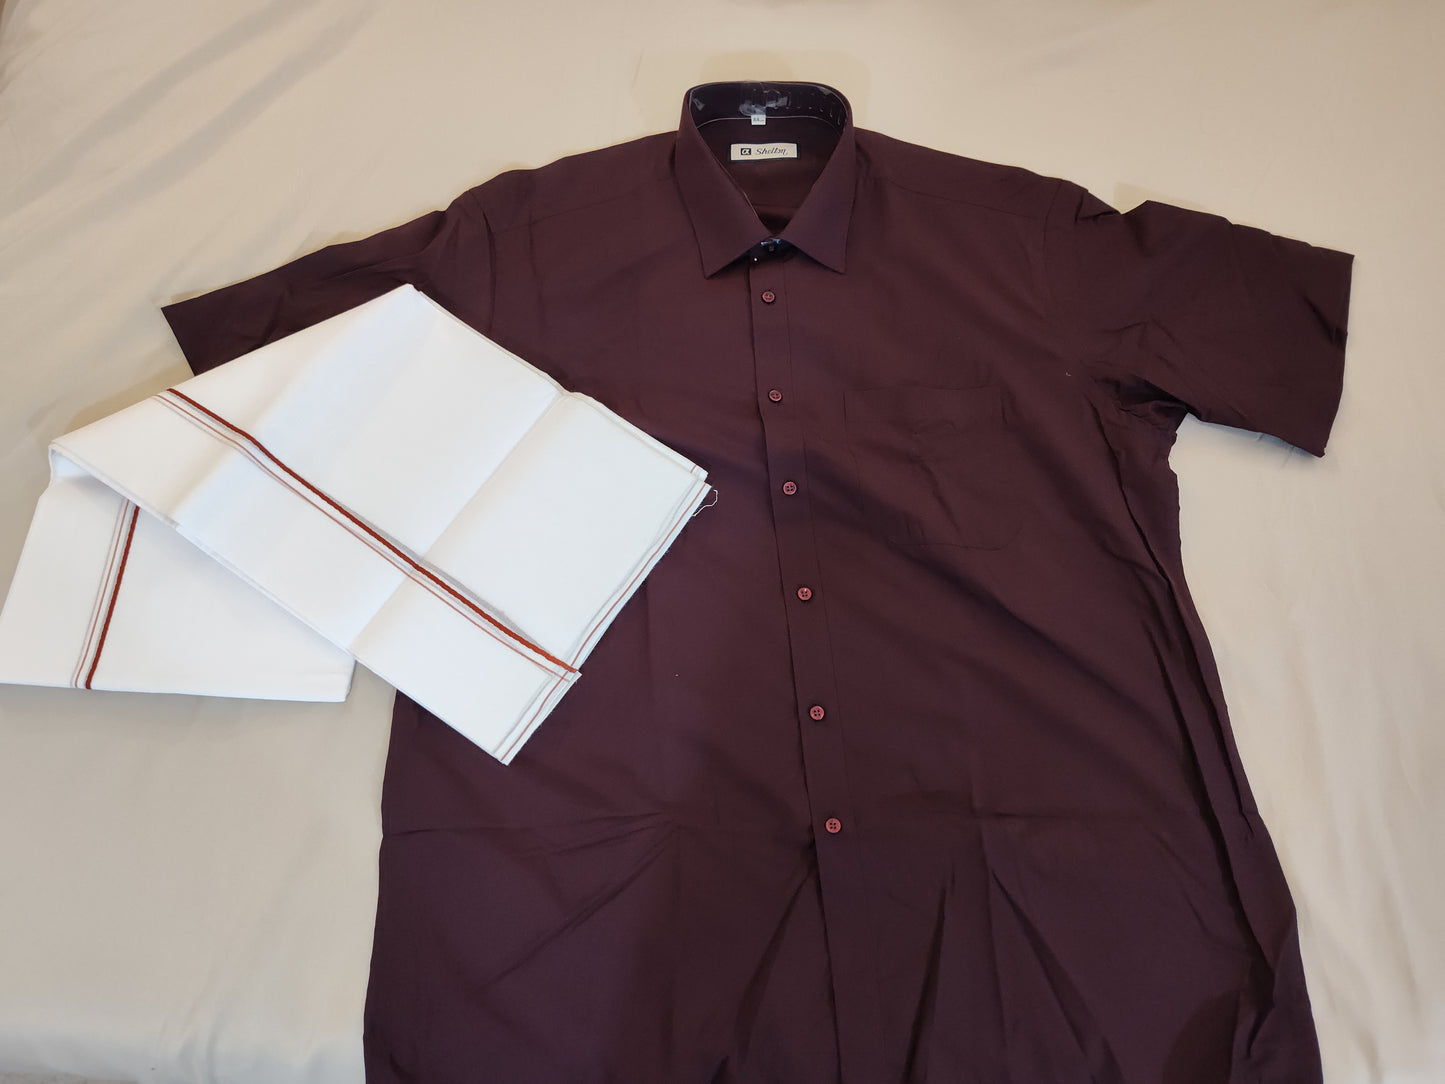 Attractive Burgundy Color Short Sleeves Shirt Near Me